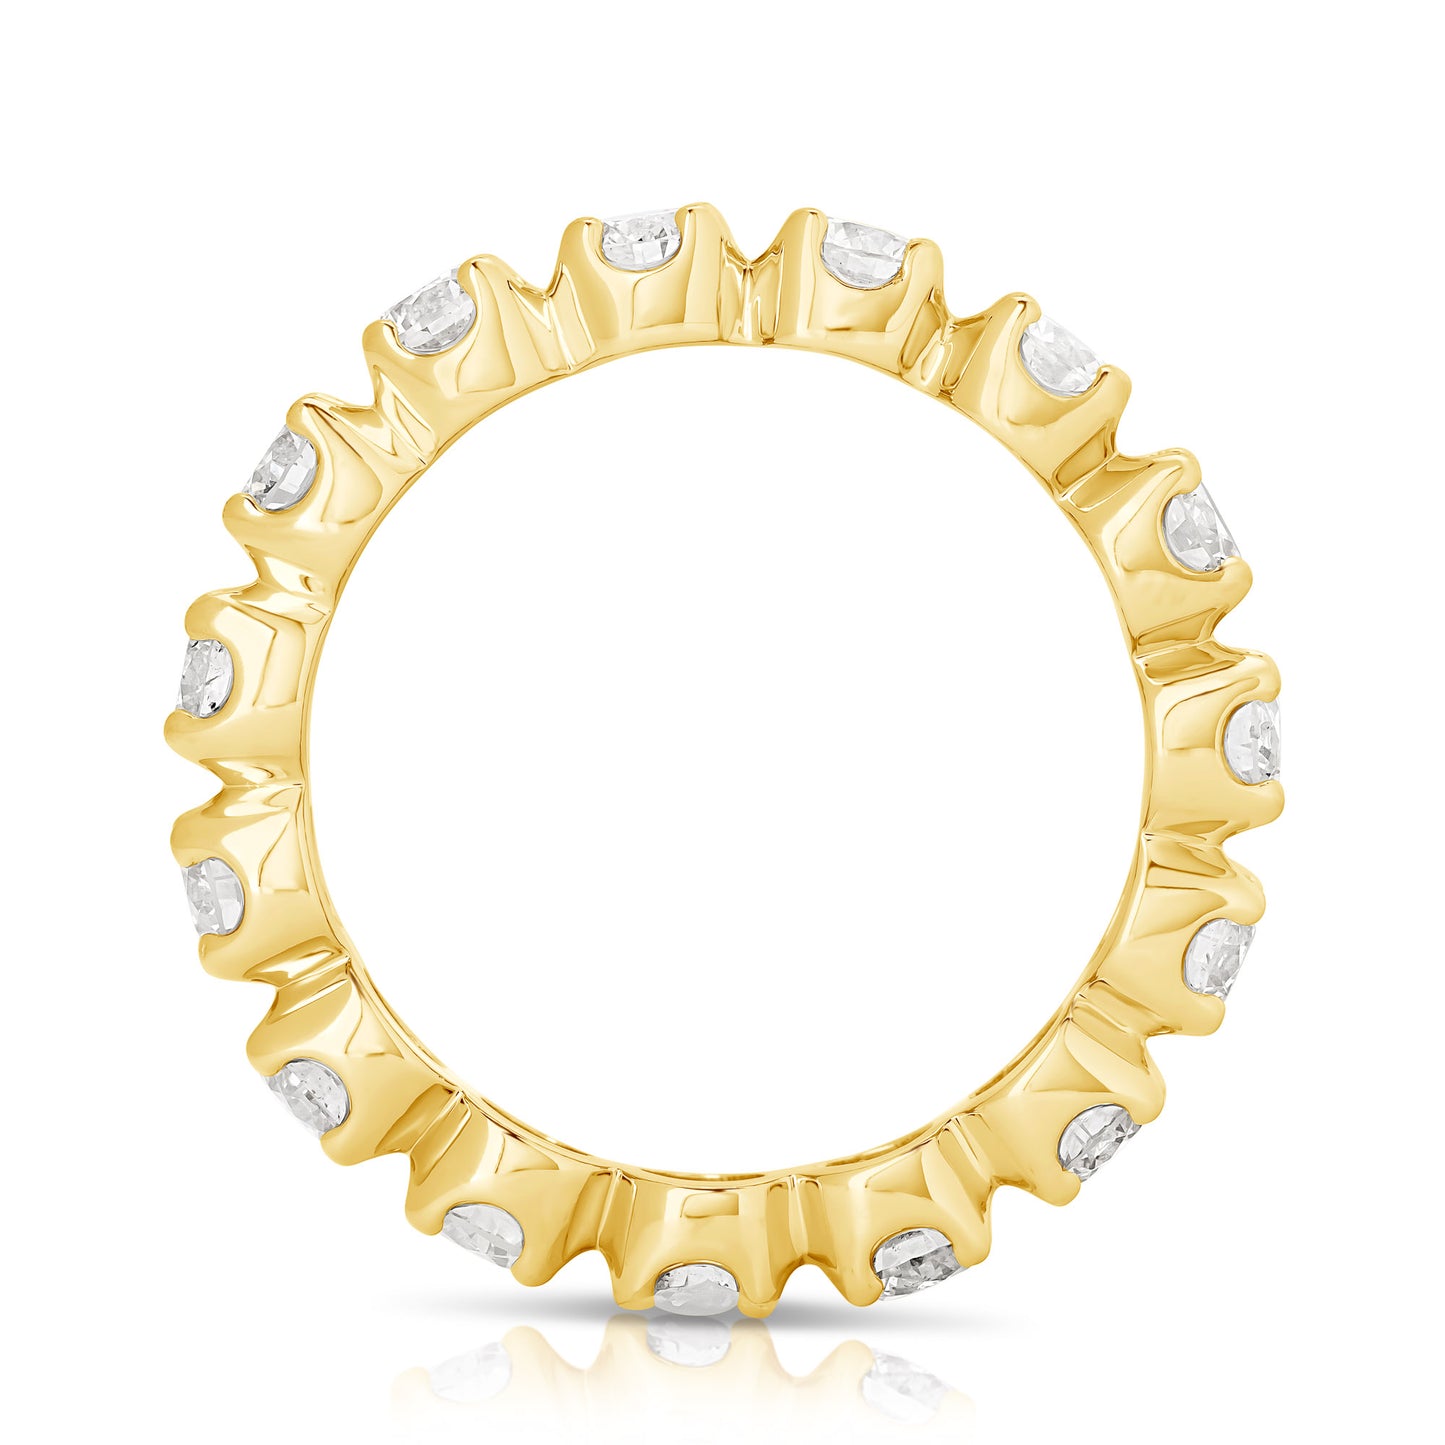 Load image into Gallery viewer, PREMIER 2 CT BUTTERCUP ETERNITY BAND
